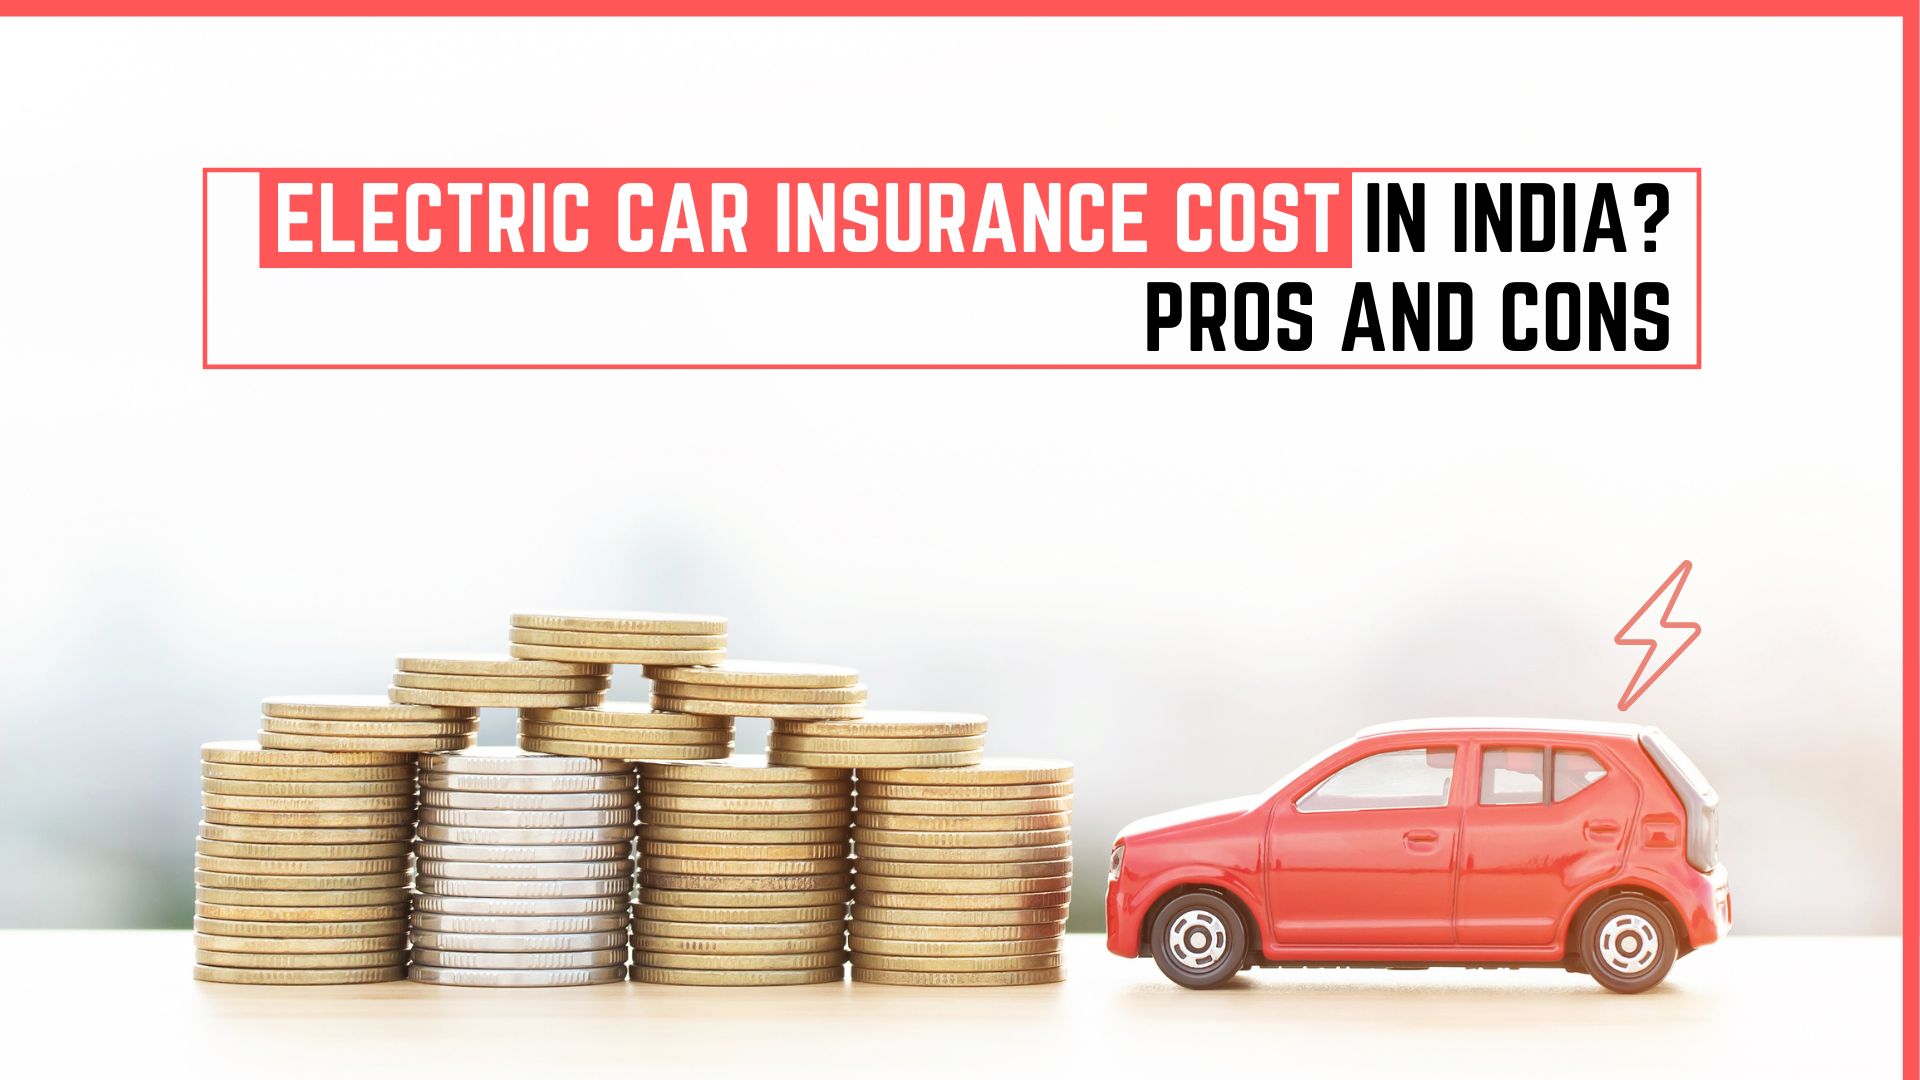 https://e-vehicleinfo.com/electric-car-insurance-cost-in-india-pros-and-cons/